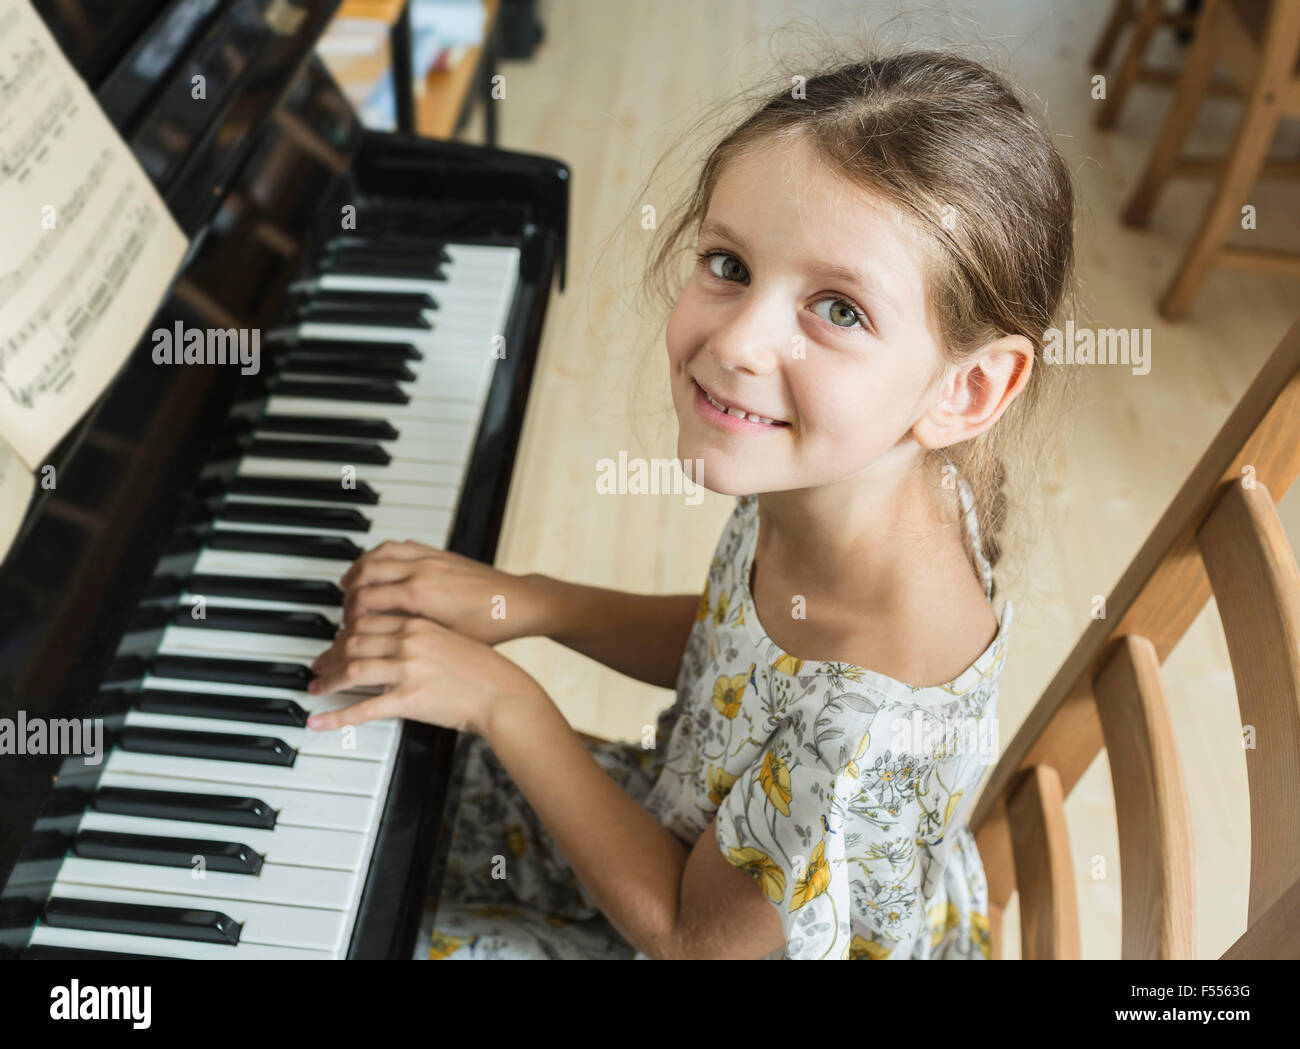 High angle portrait of girl playing piano at home Banque D'Images